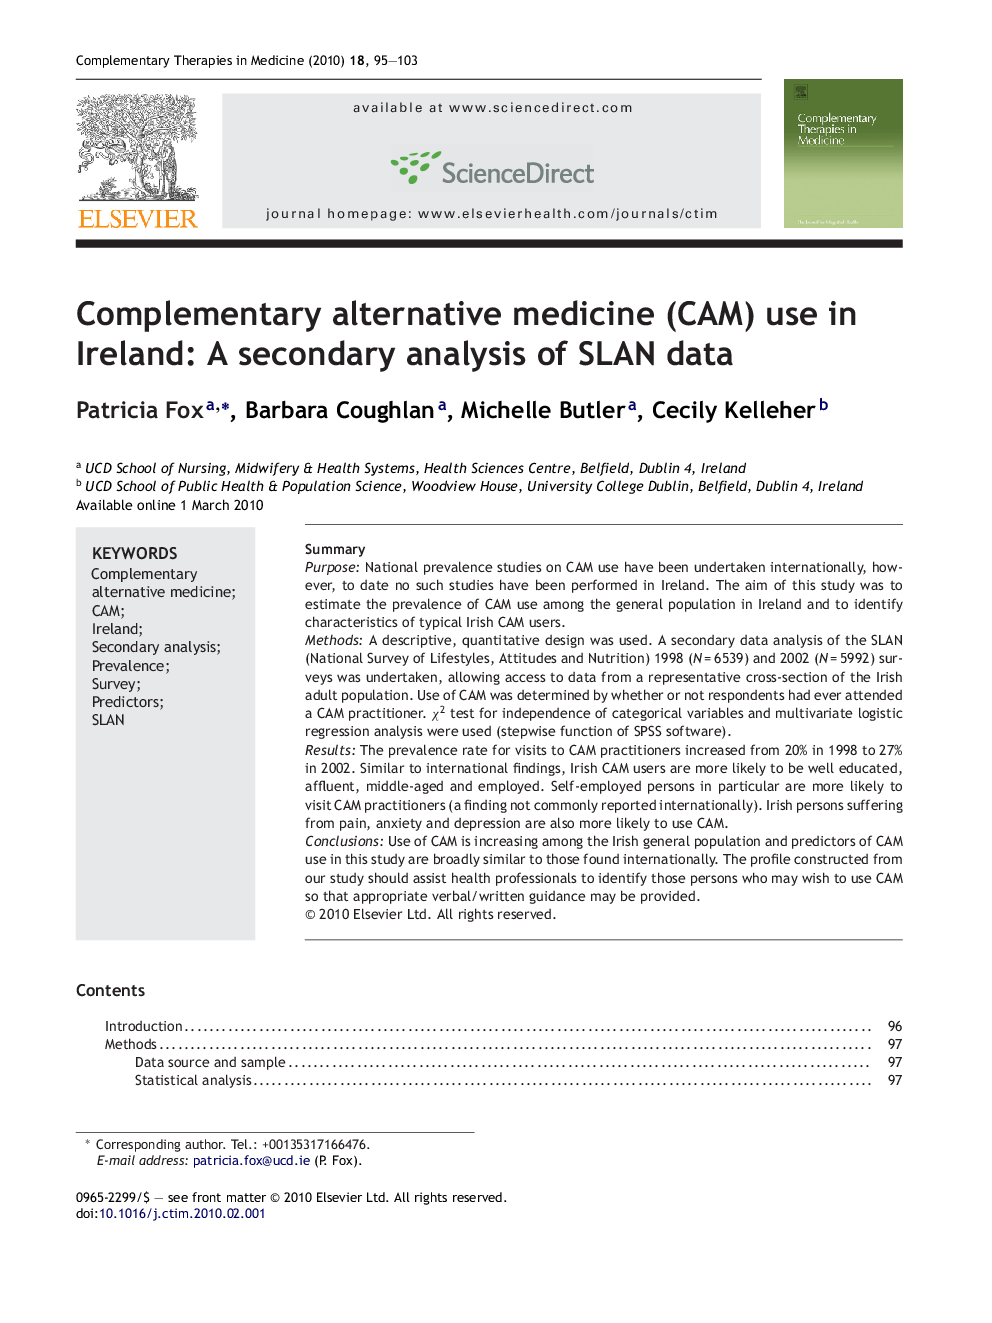 Complementary alternative medicine (CAM) use in Ireland: A secondary analysis of SLAN data